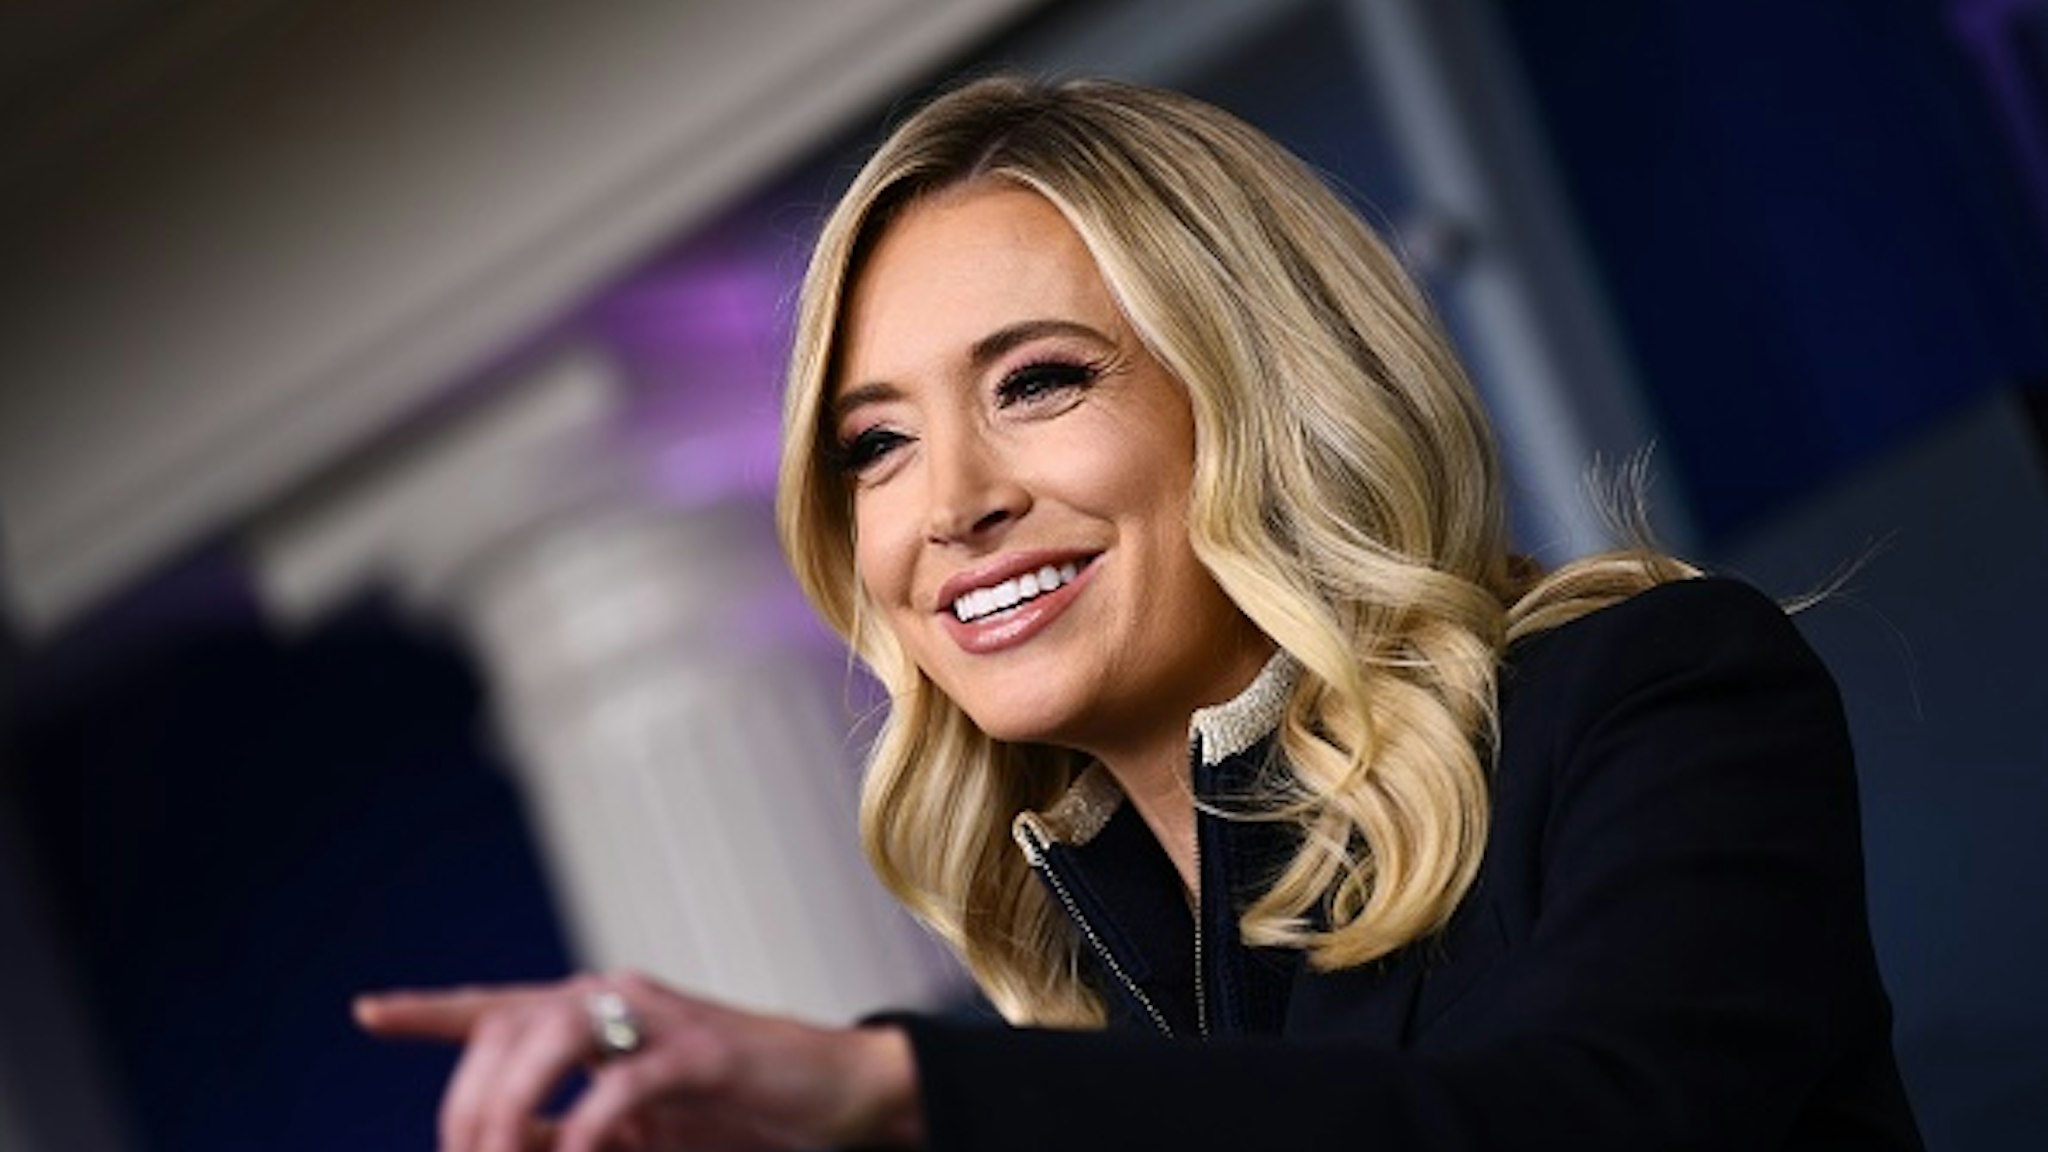 White House Press Secretary Kayleigh McEnany speaks to the press on June 1, 2020, in the Brady Briefing Room of the White House in Washington, DC.